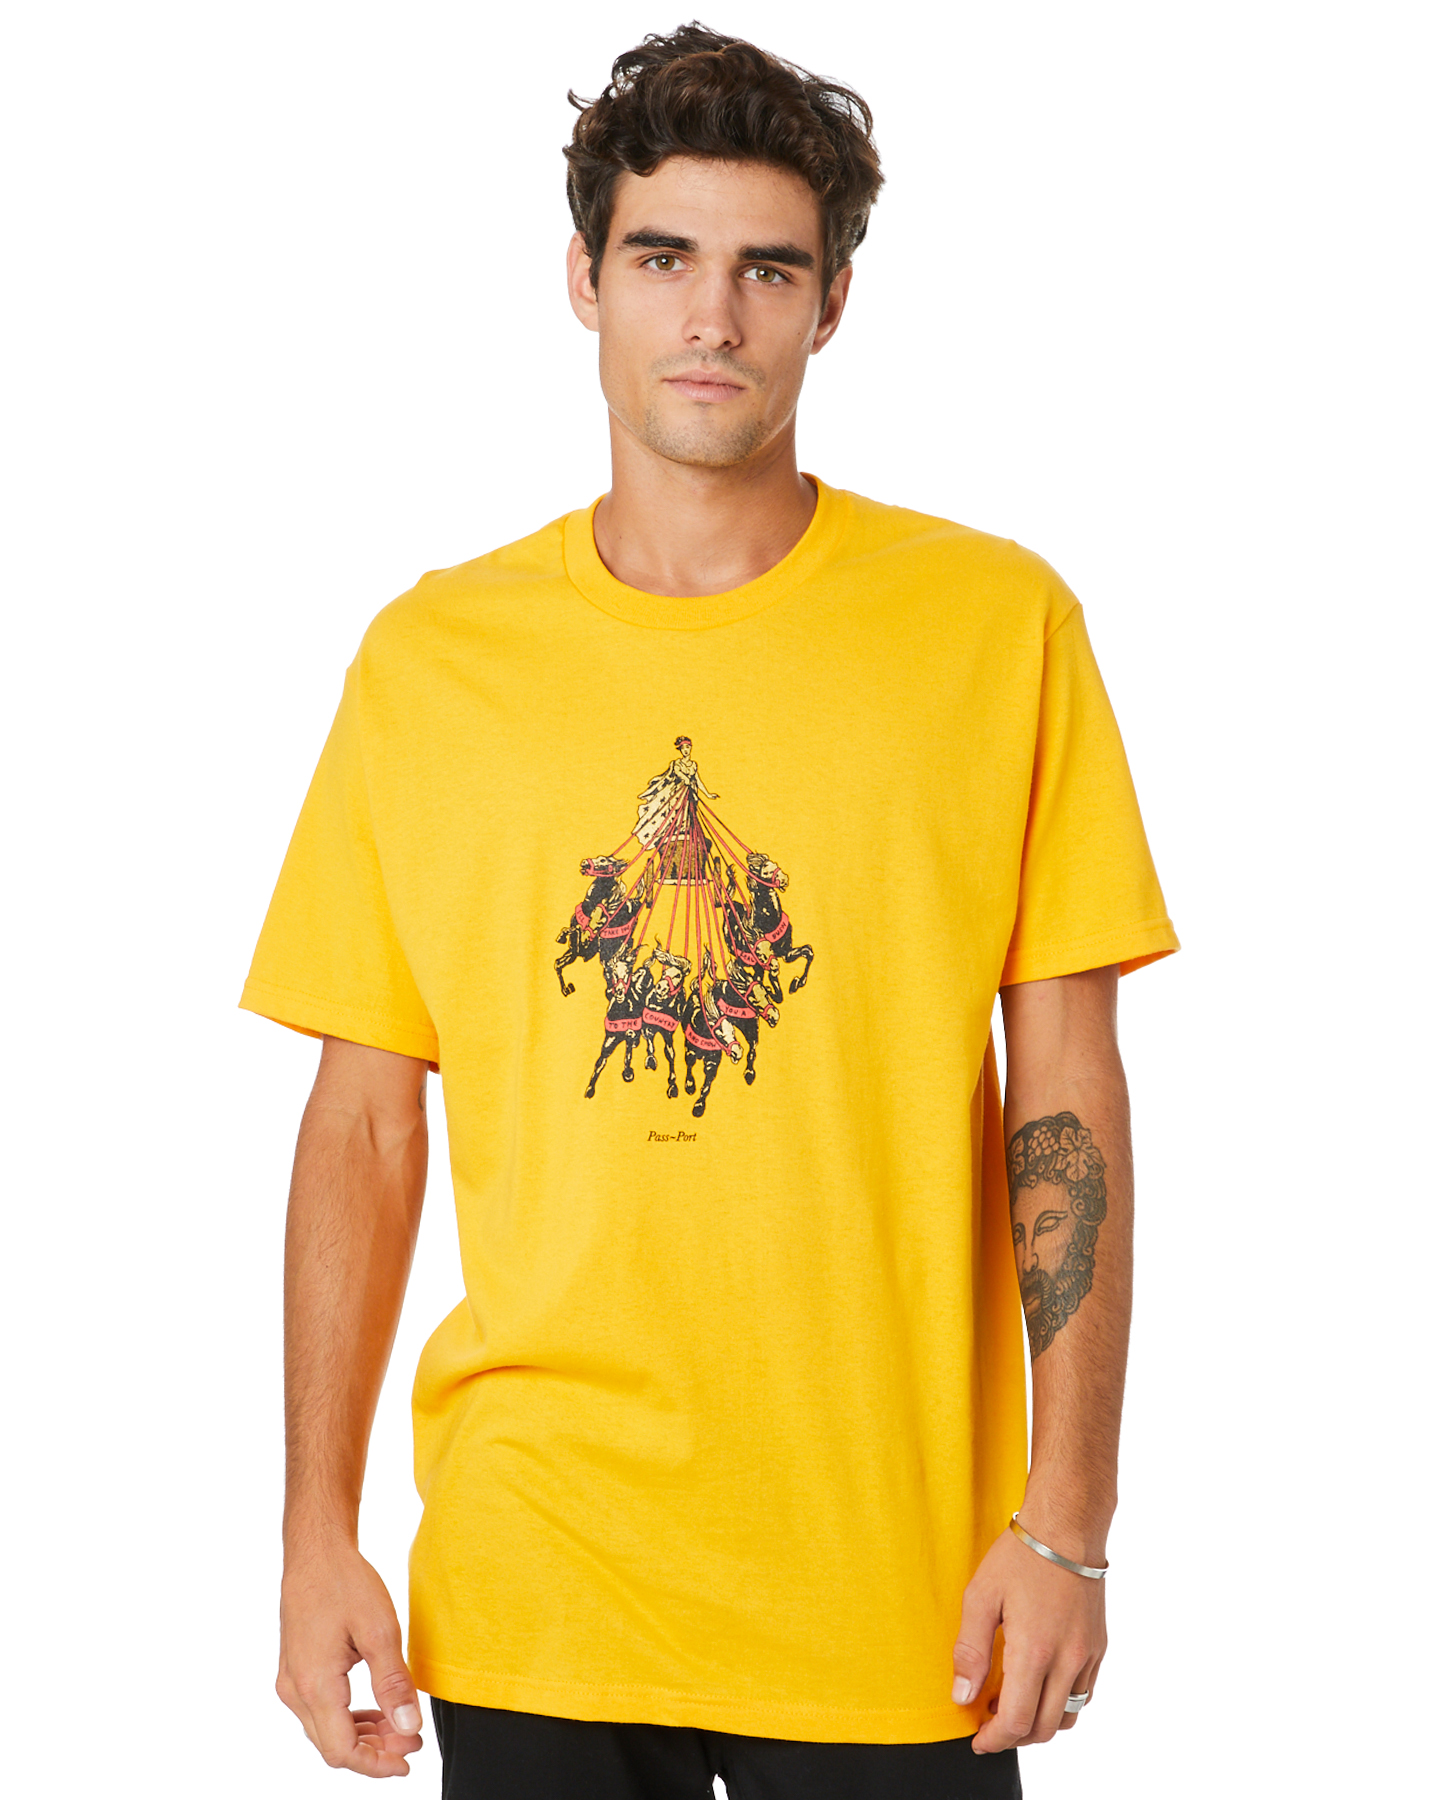 Pass Port State Horses Mens Tee - Gold | SurfStitch